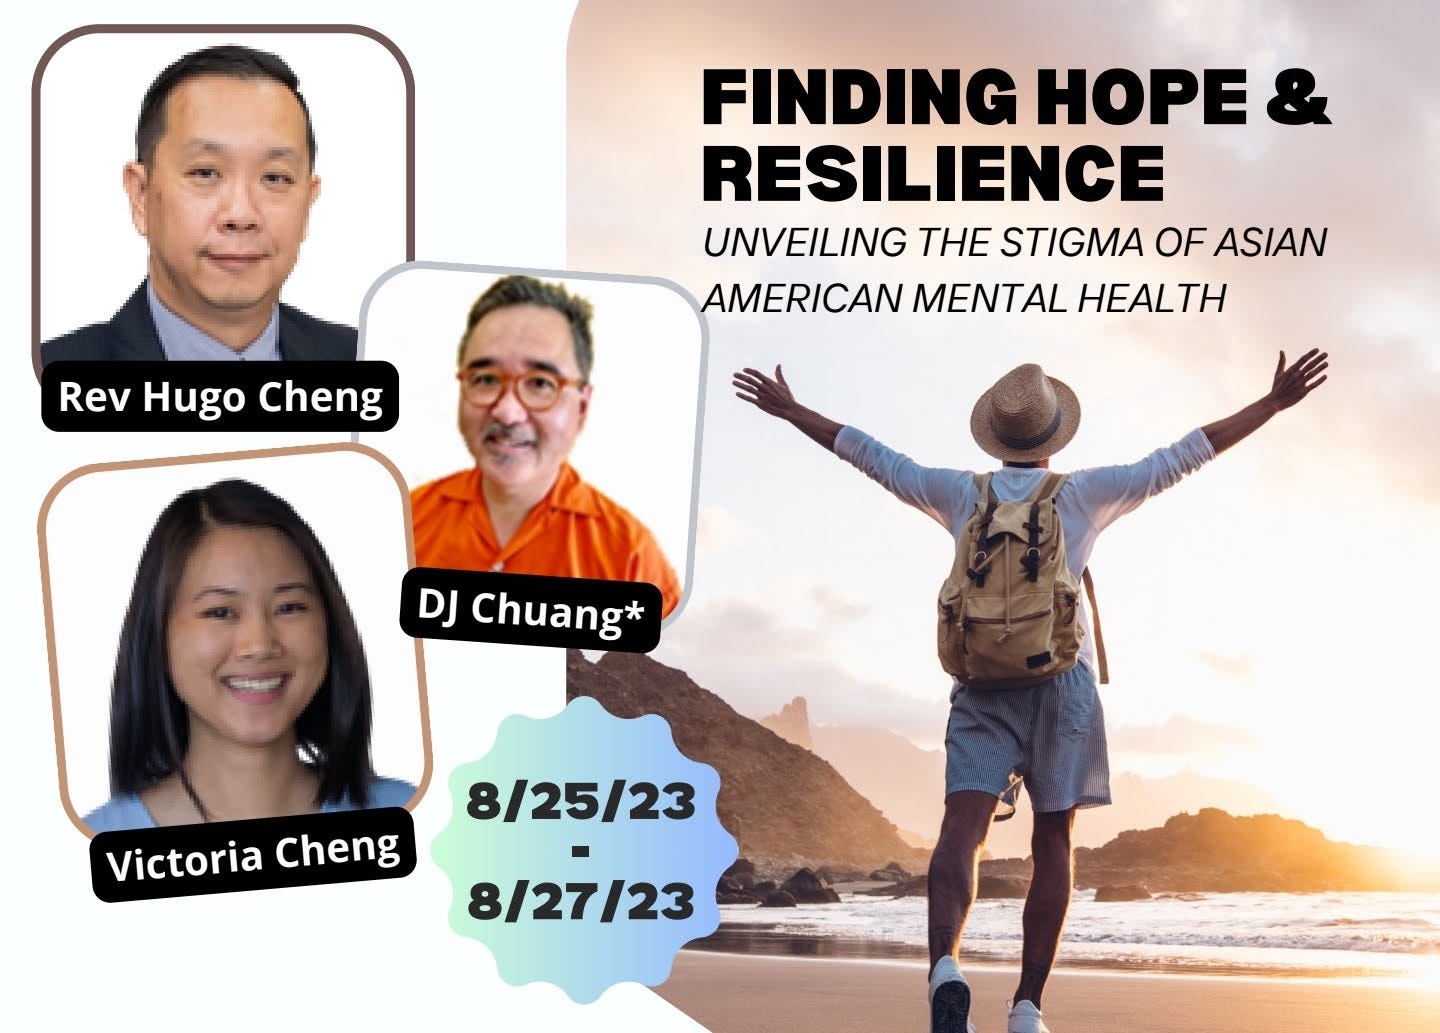 Asian-American Mental Health Conference with Pastor Hugo Cheng  程德鵬牧師 and his daughter, Victoria Cheng hosted at ACCCNW. 